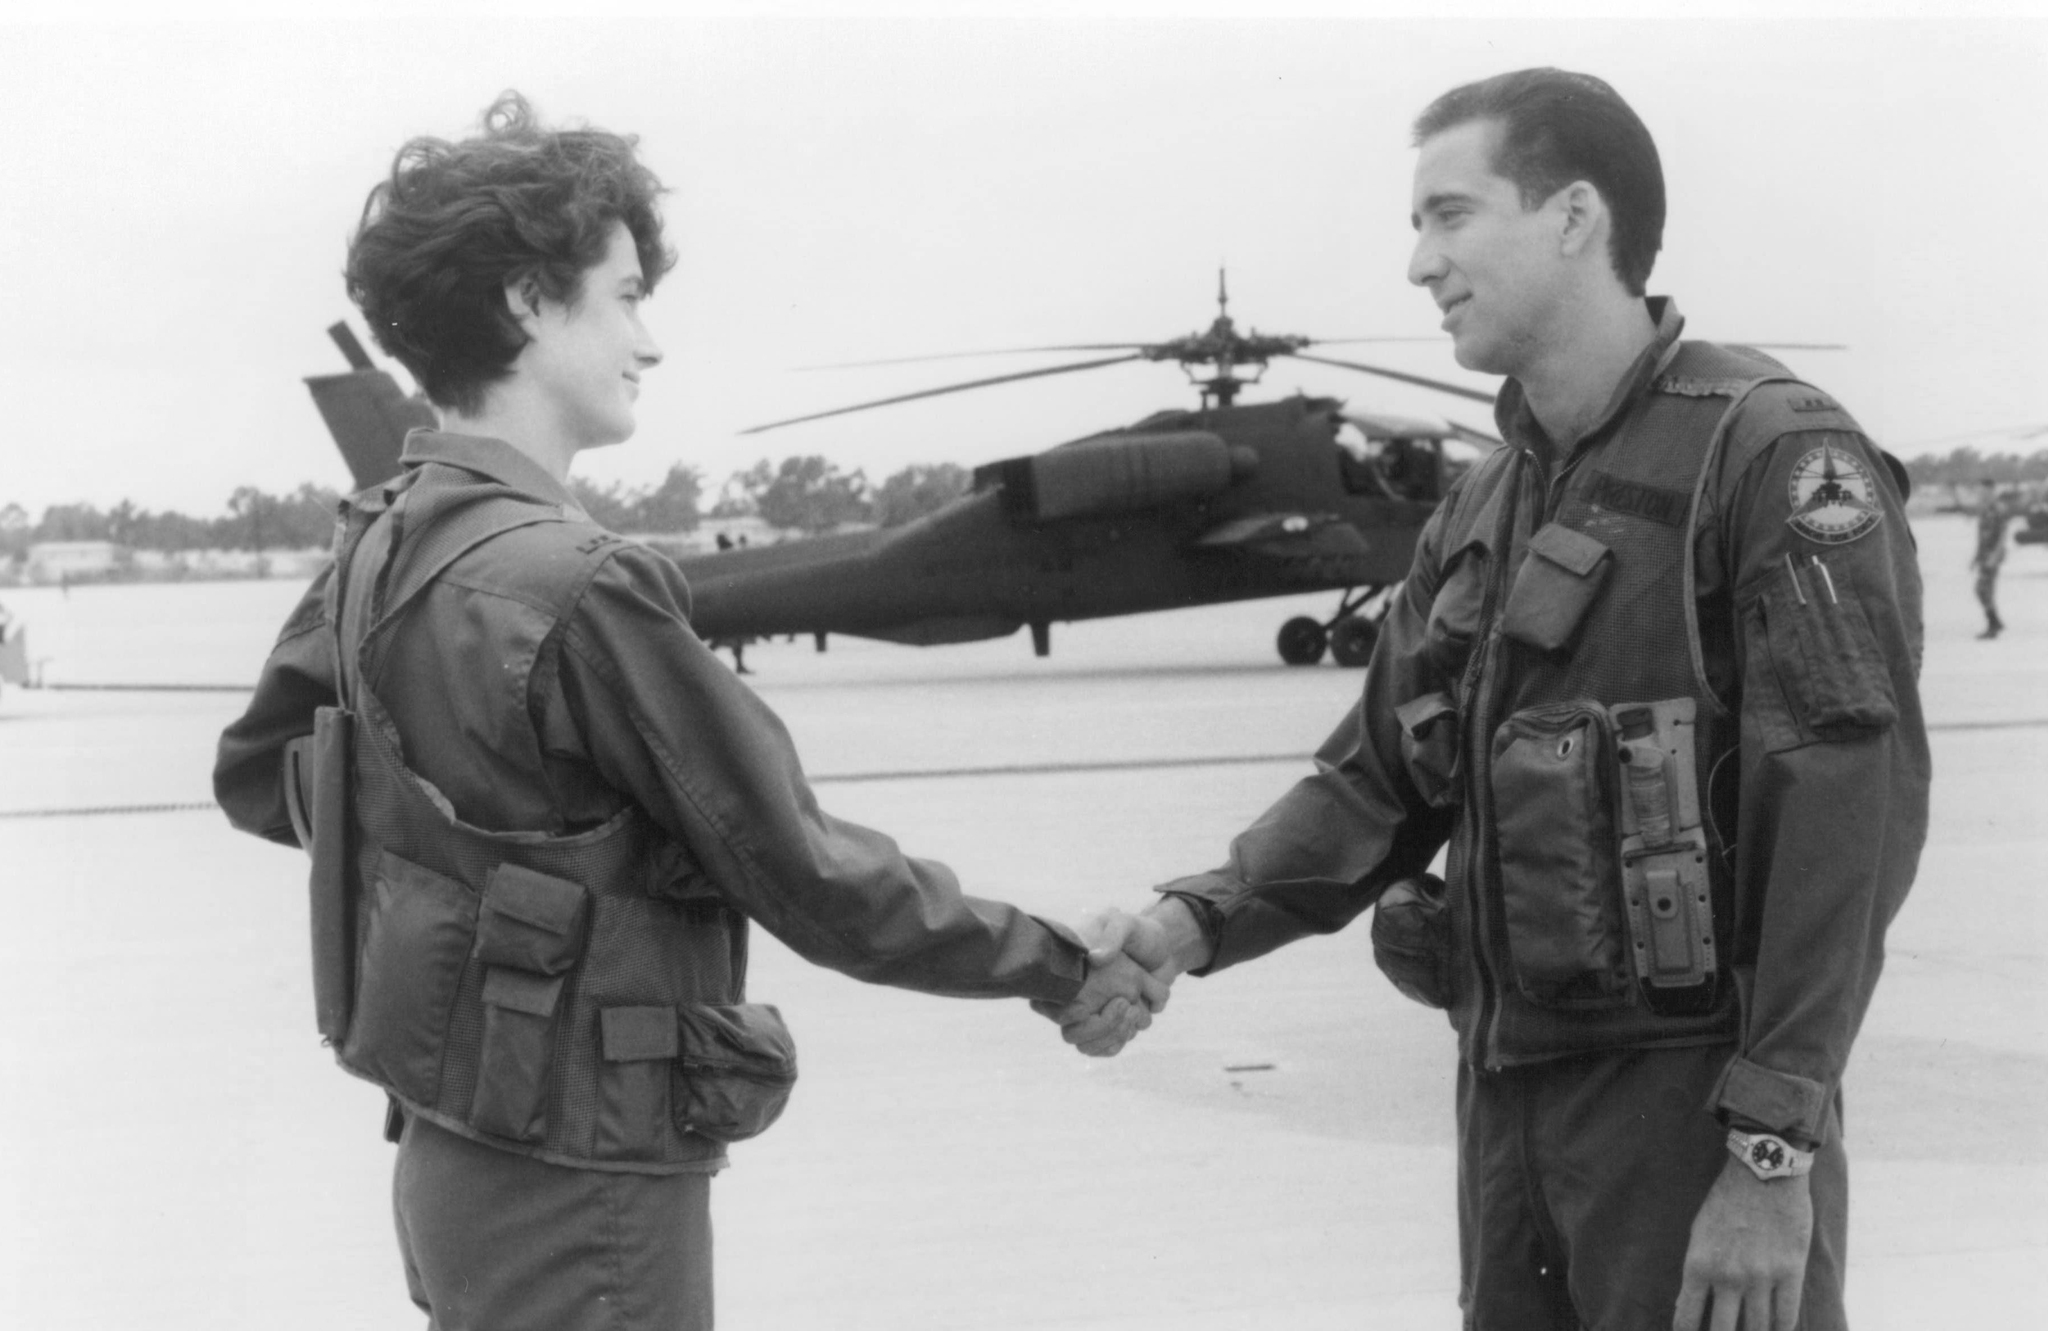 Still of Nicolas Cage and Sean Young in Fire Birds (1990)